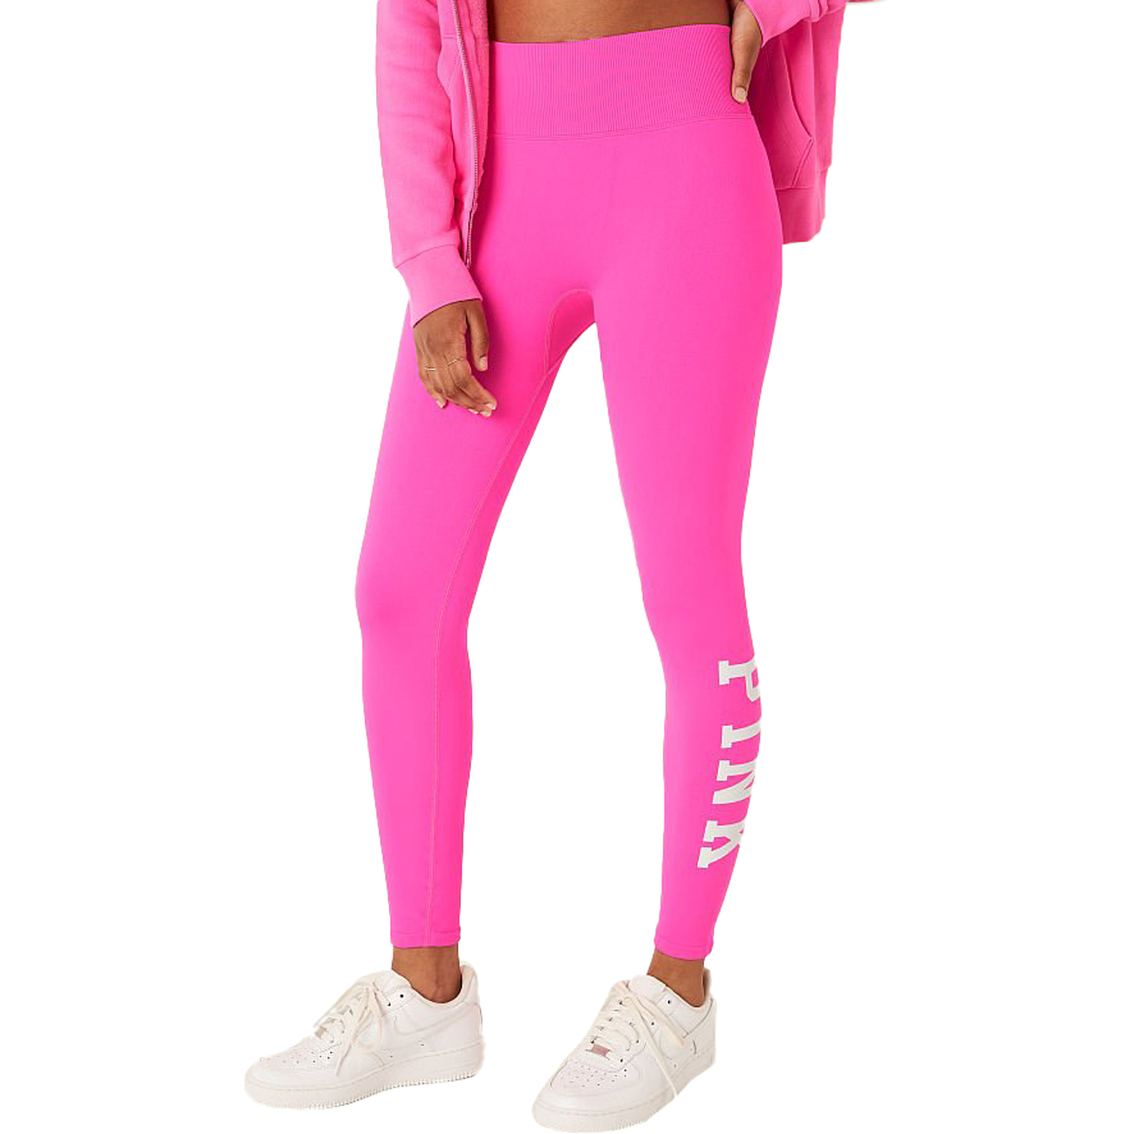 Victoria's Secret Pink Seamless High Waisted Leggings - Image 1 of 4